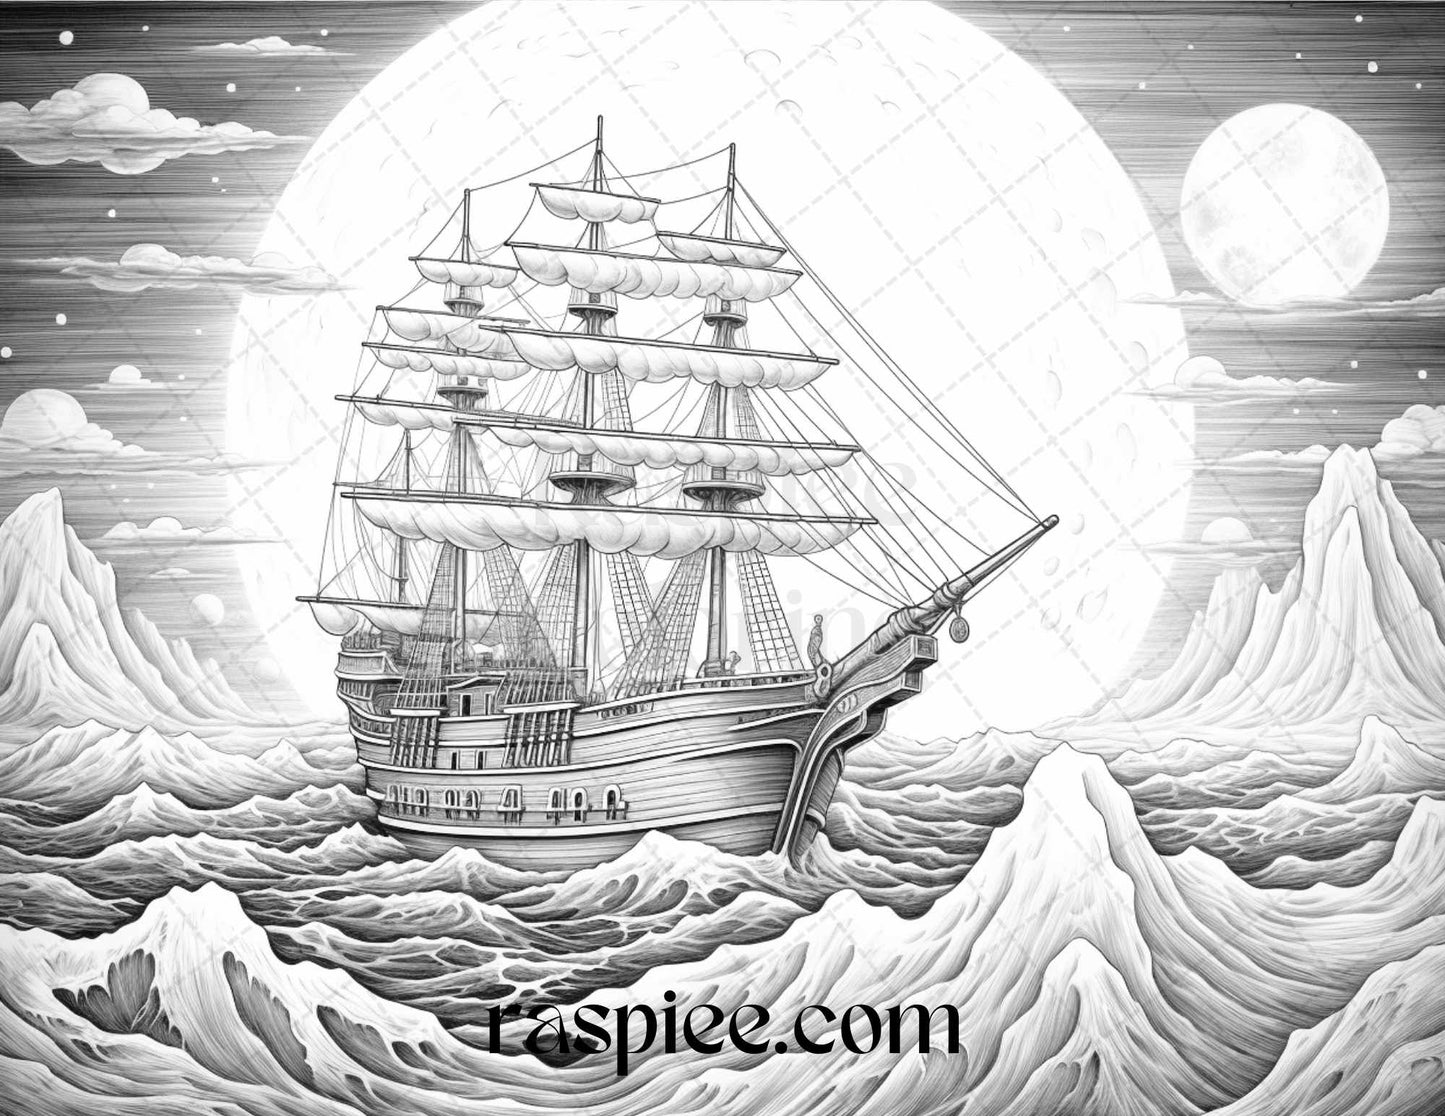 Celestial landscapes grayscale coloring page, Adult coloring printable of astral scene, Night sky universe grayscale art, Moon and stars celestial coloring, Black and white grayscale coloring sheet